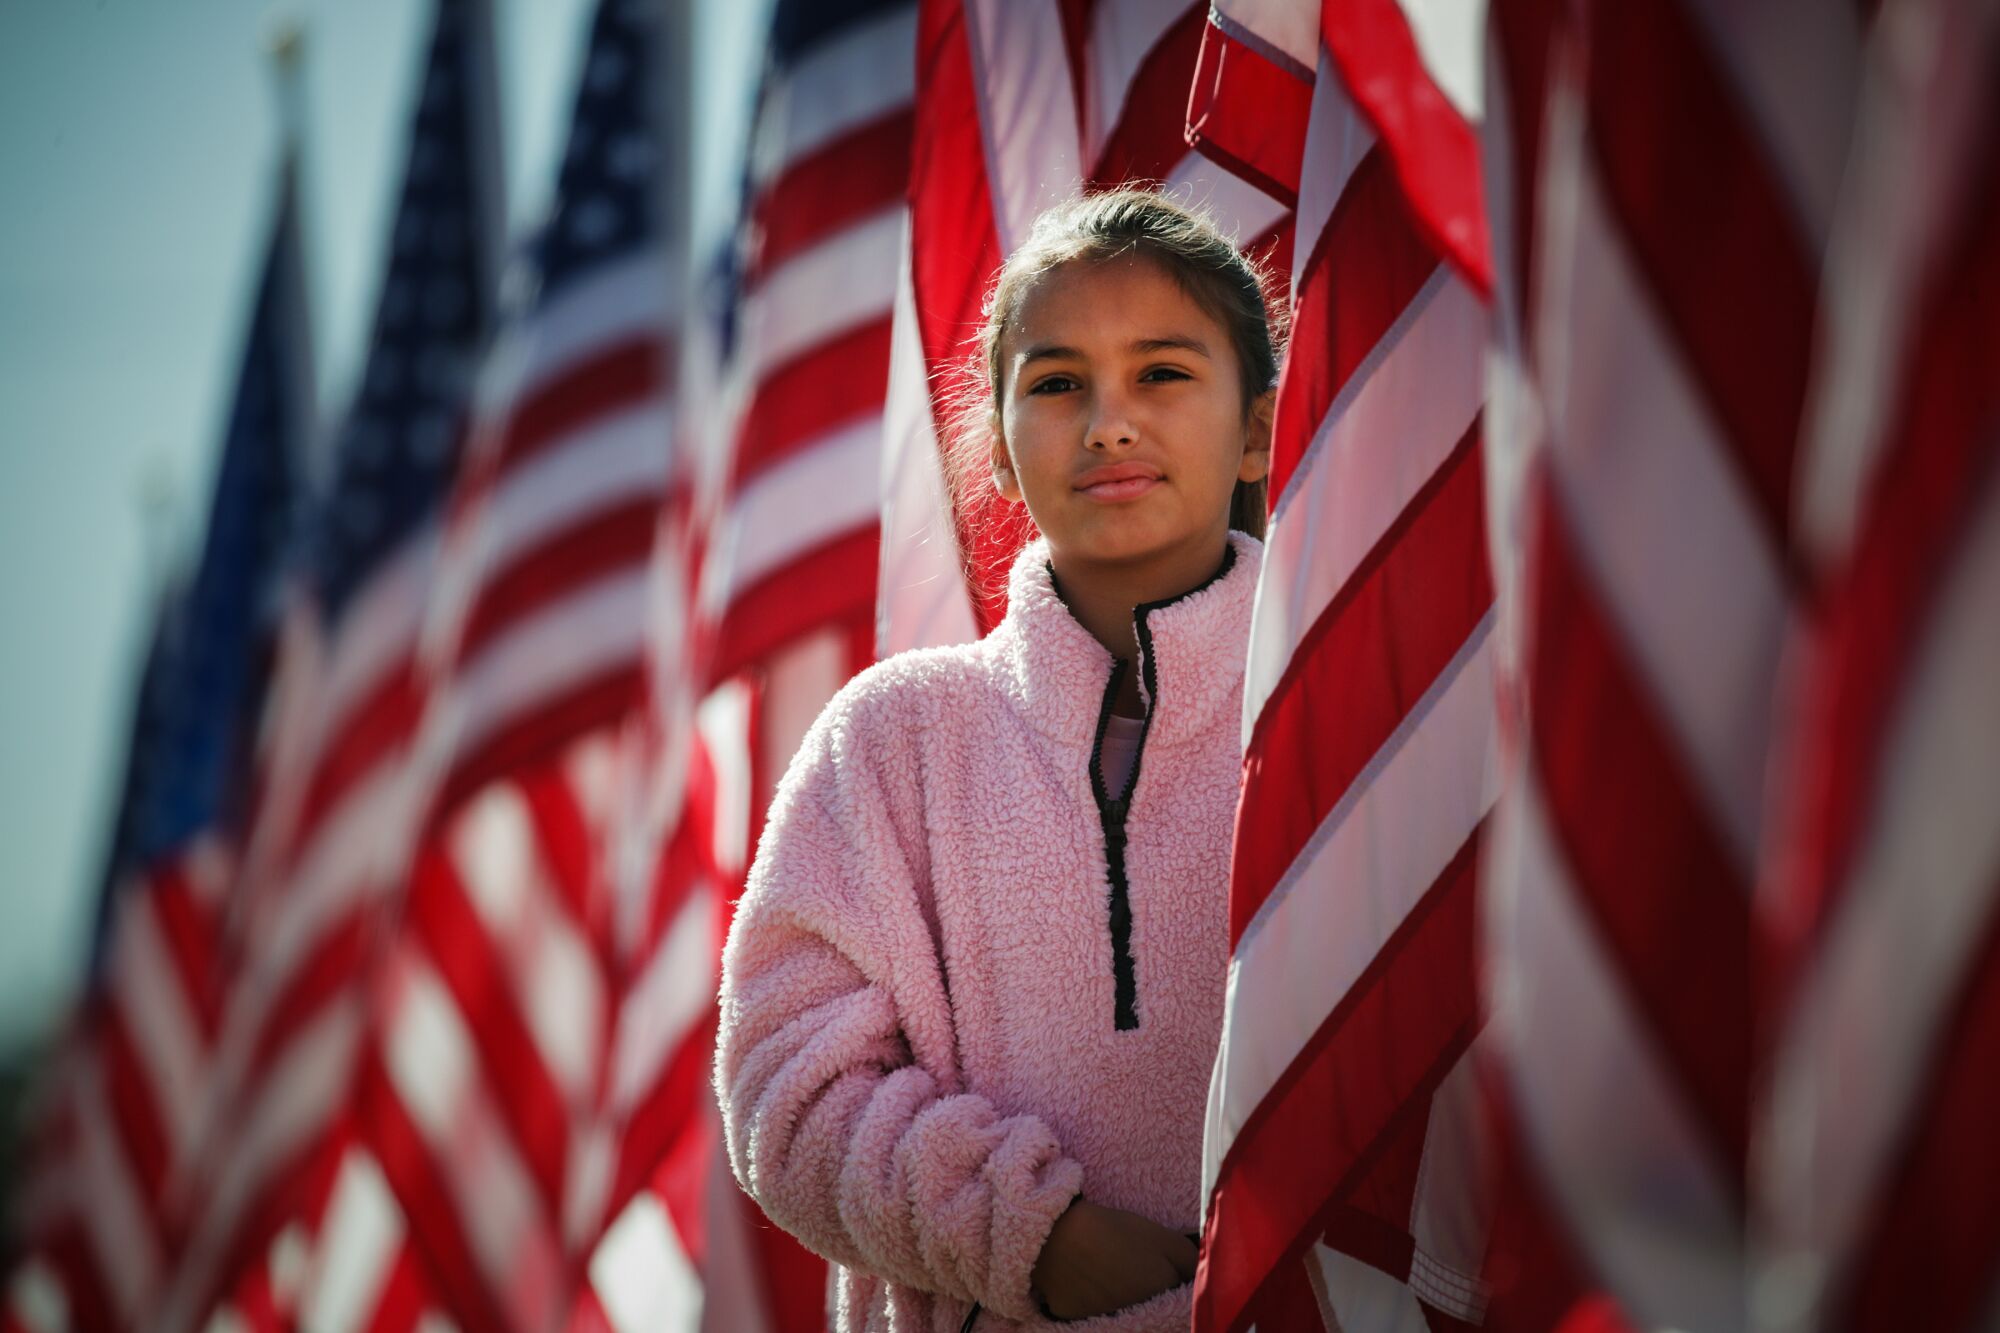 Kadence Belle visits Field of Valor, to honor troops and veterans on the grounds of Sierra Vista Middle School on Saturday.